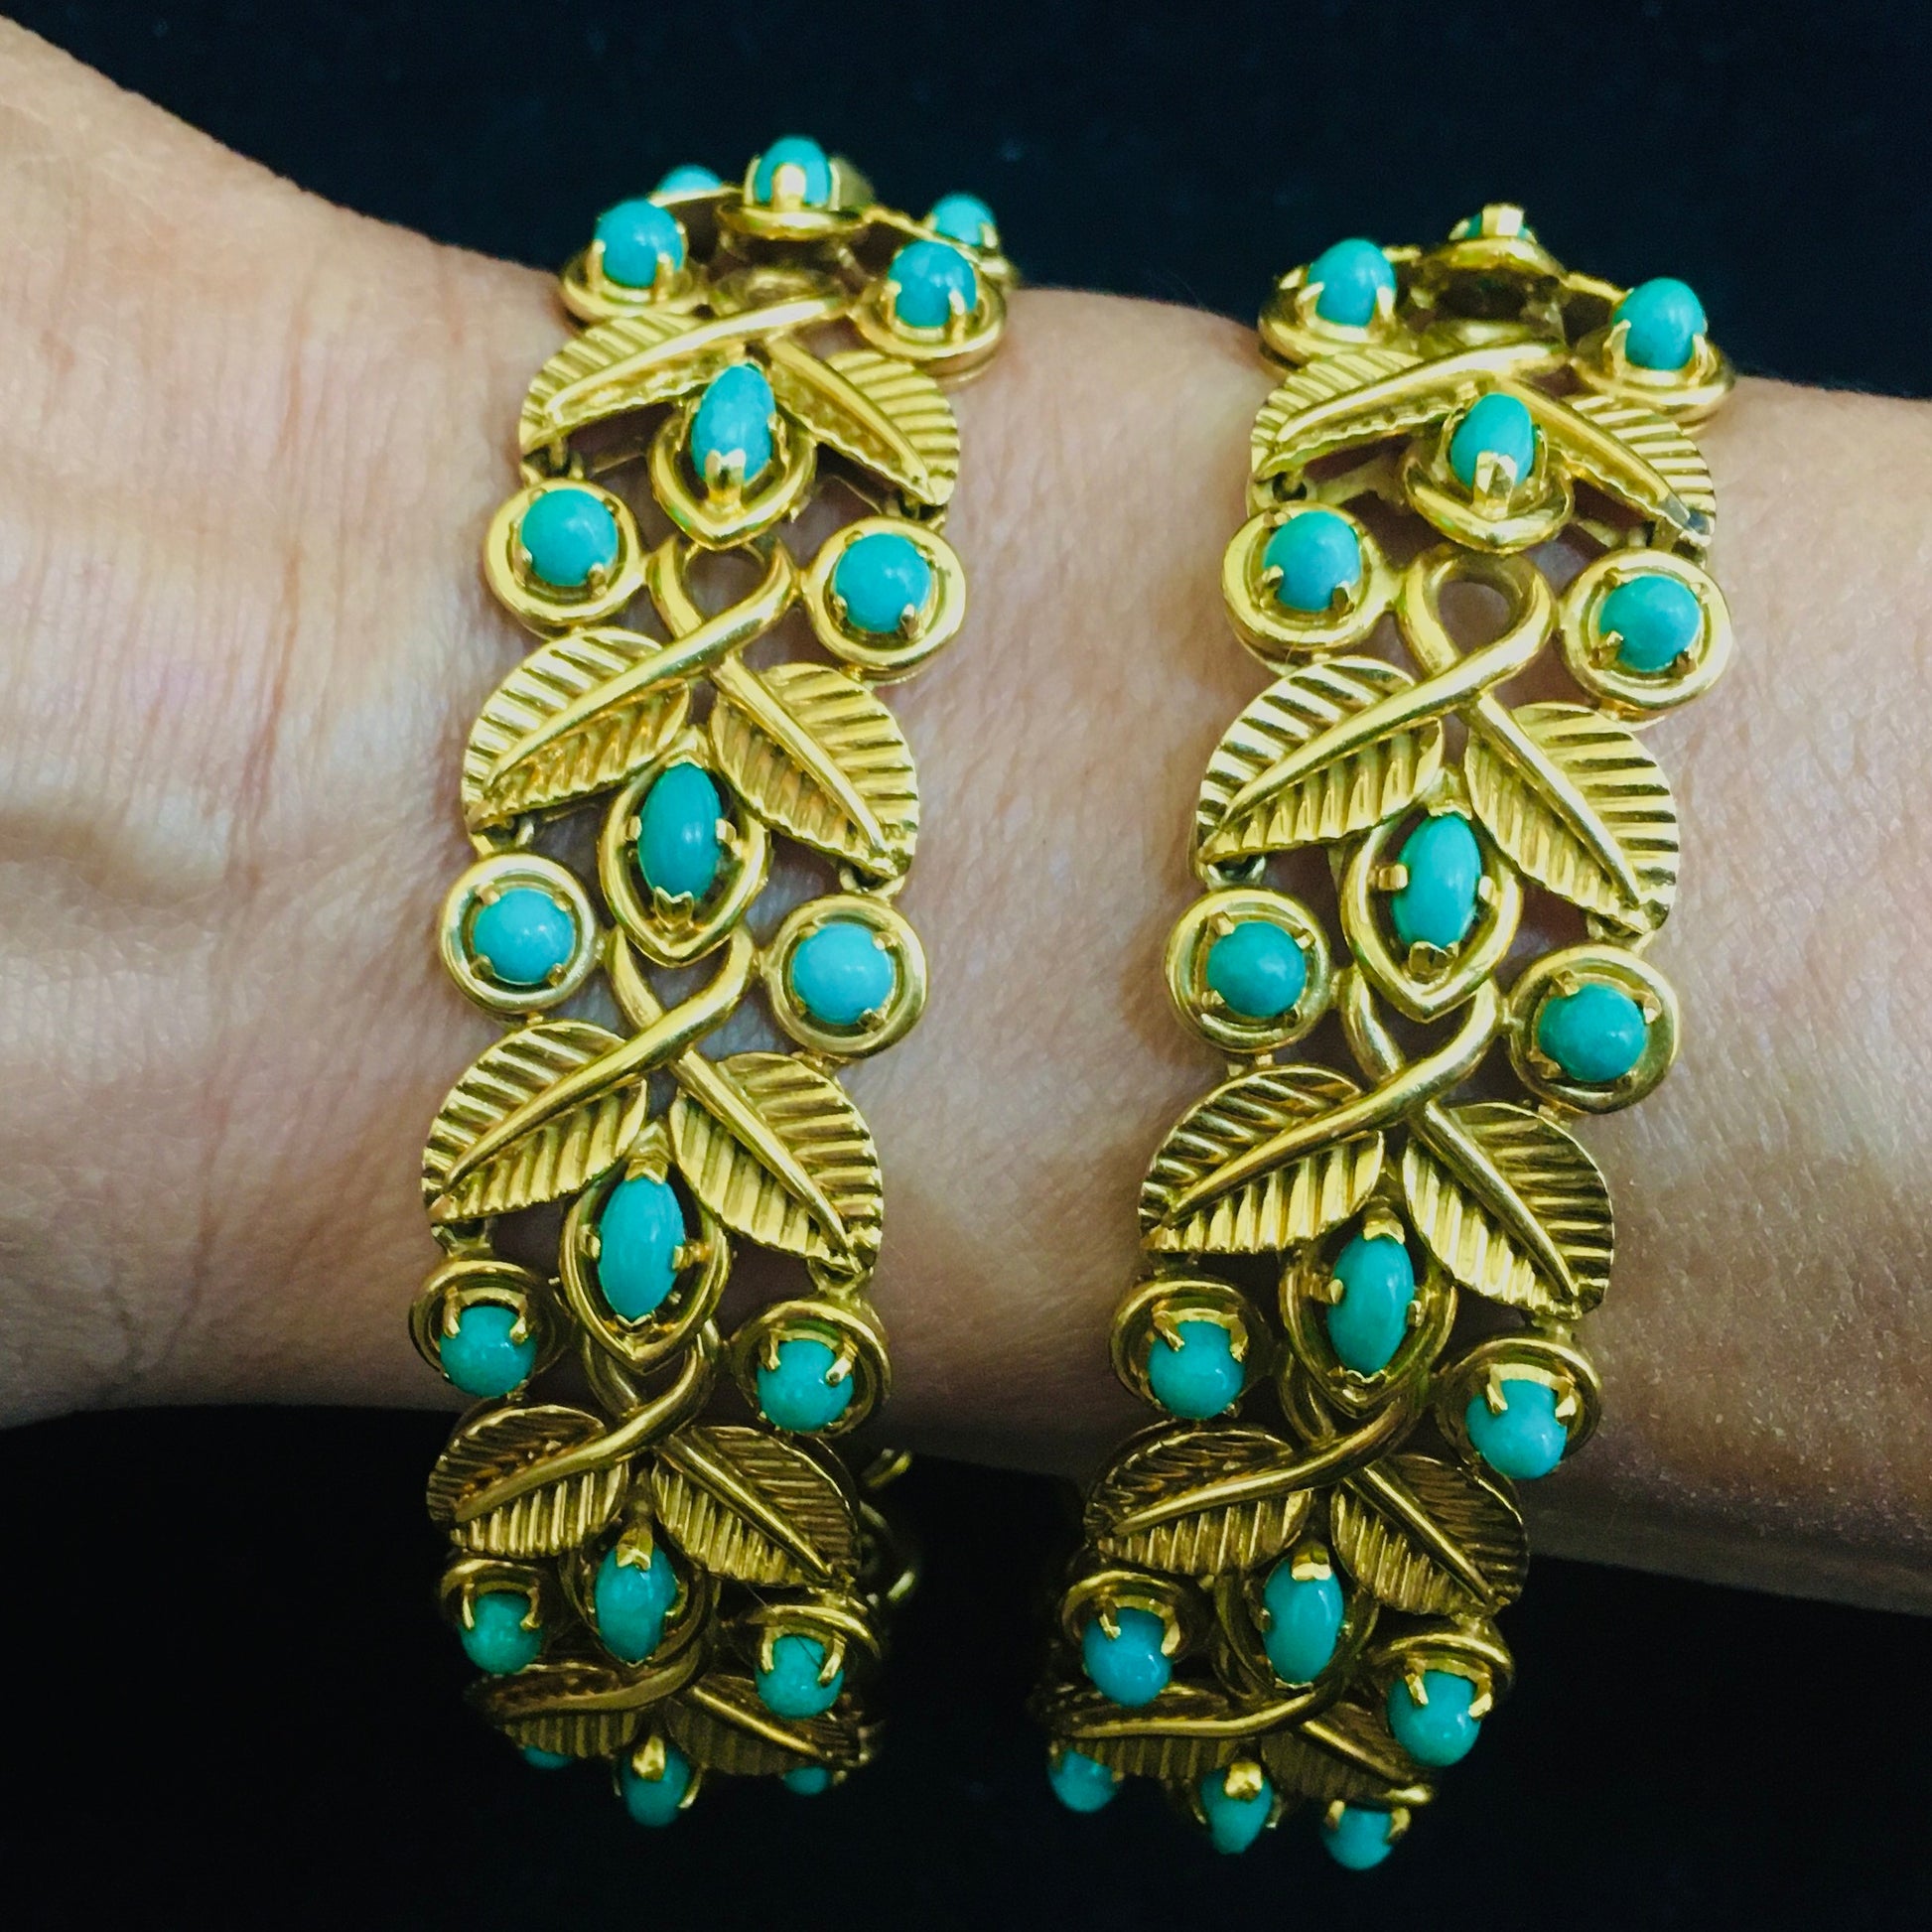 French 1950s 18KT Yellow Gold Turquoise Bracelets on wrist